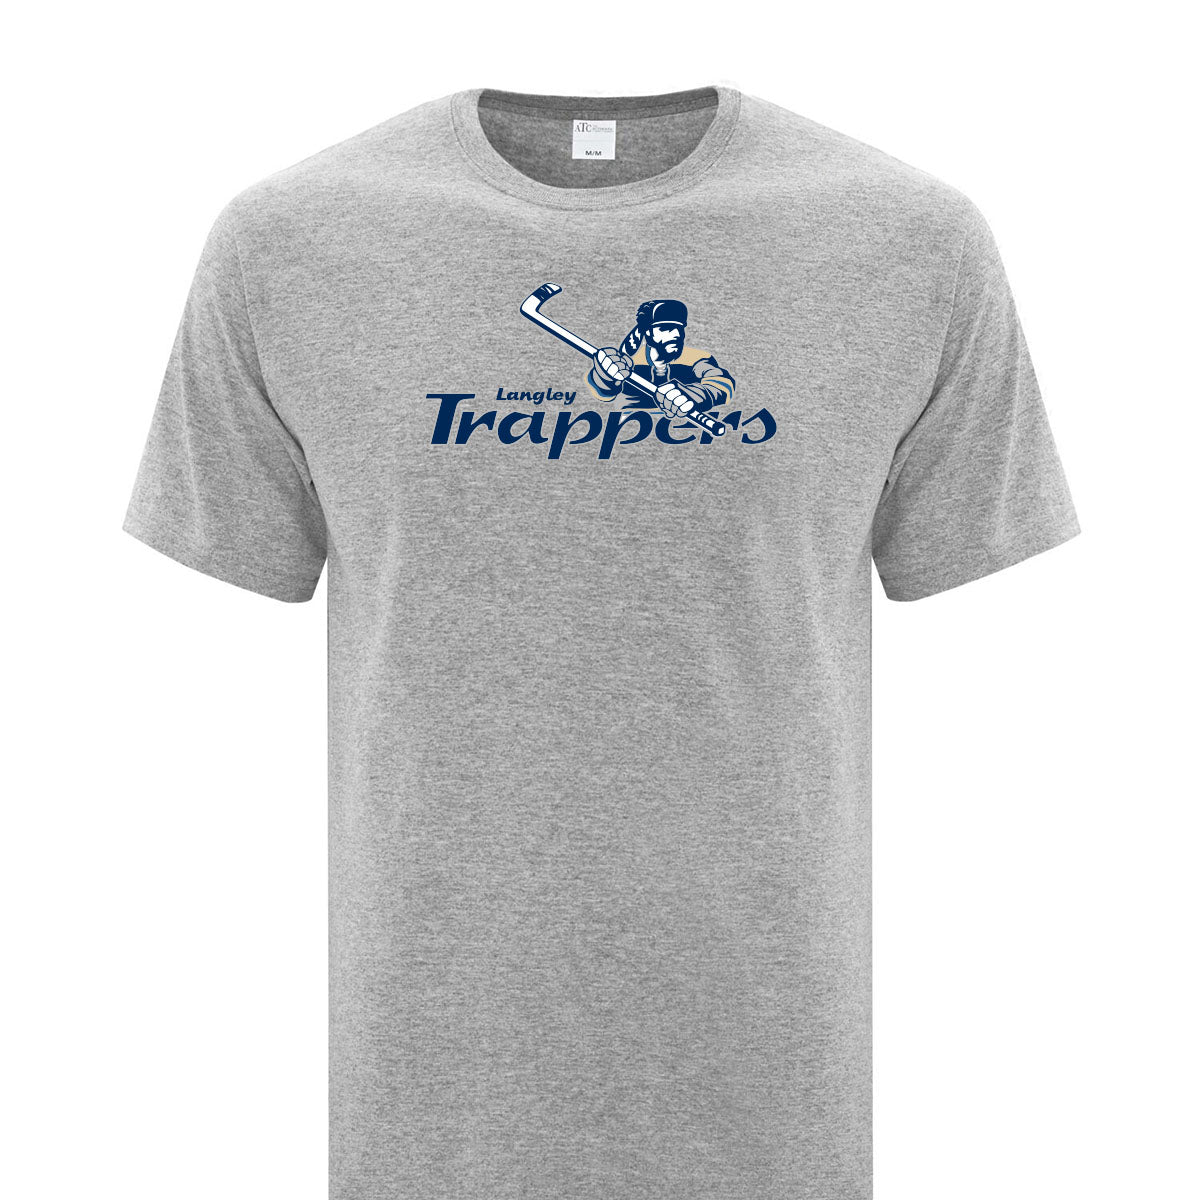 Langley Trappers -- Everyday Cotton Junior Tee